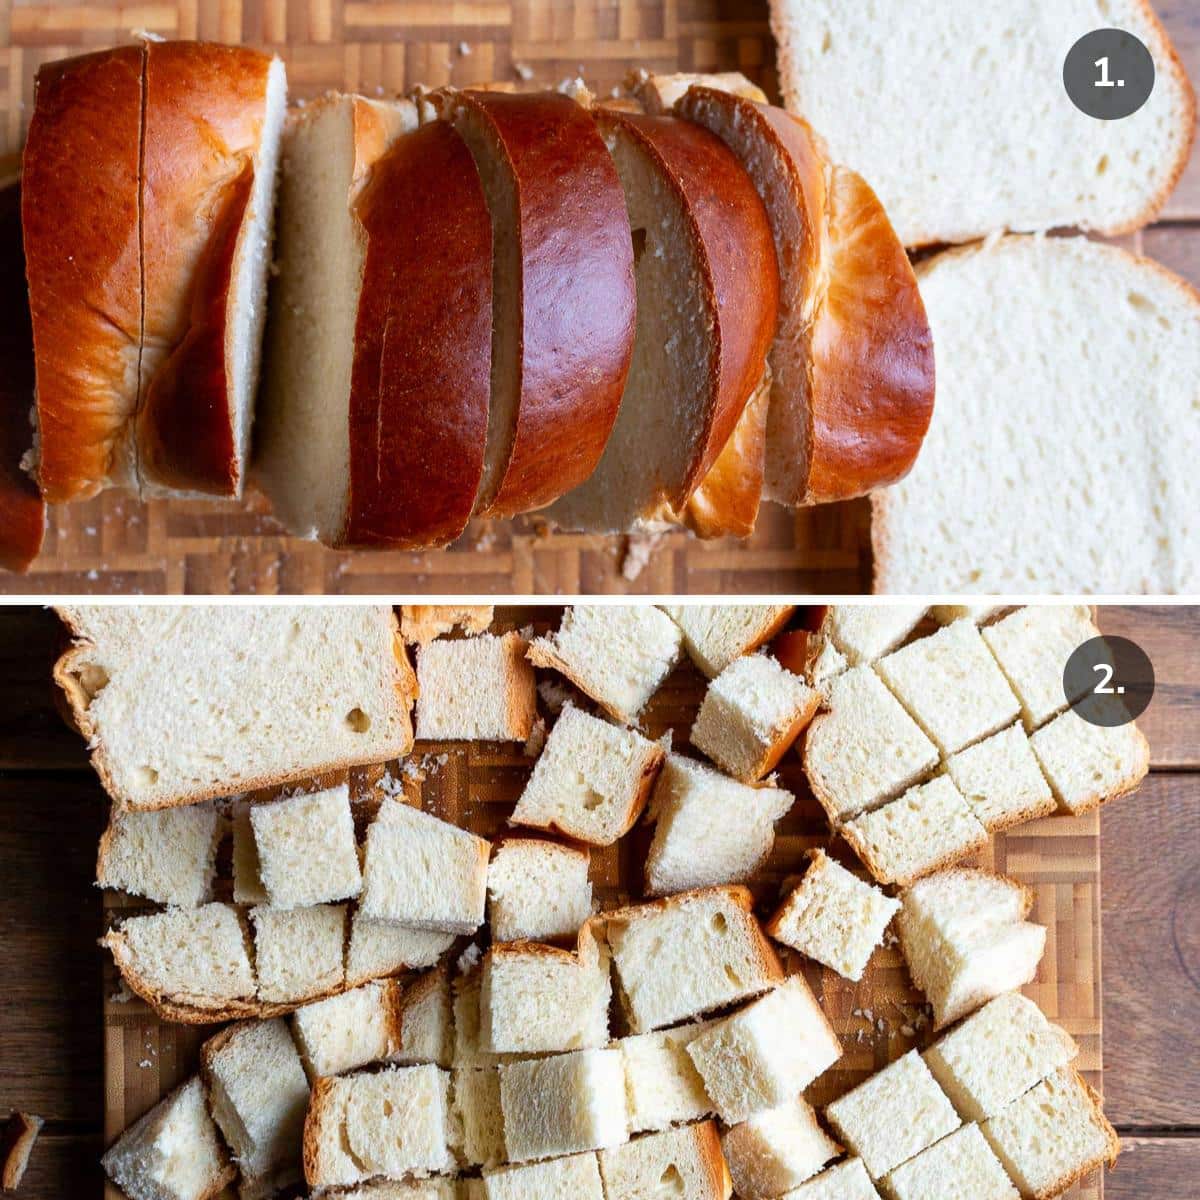 Stale Brioche bread sliced and cut into cubes. 